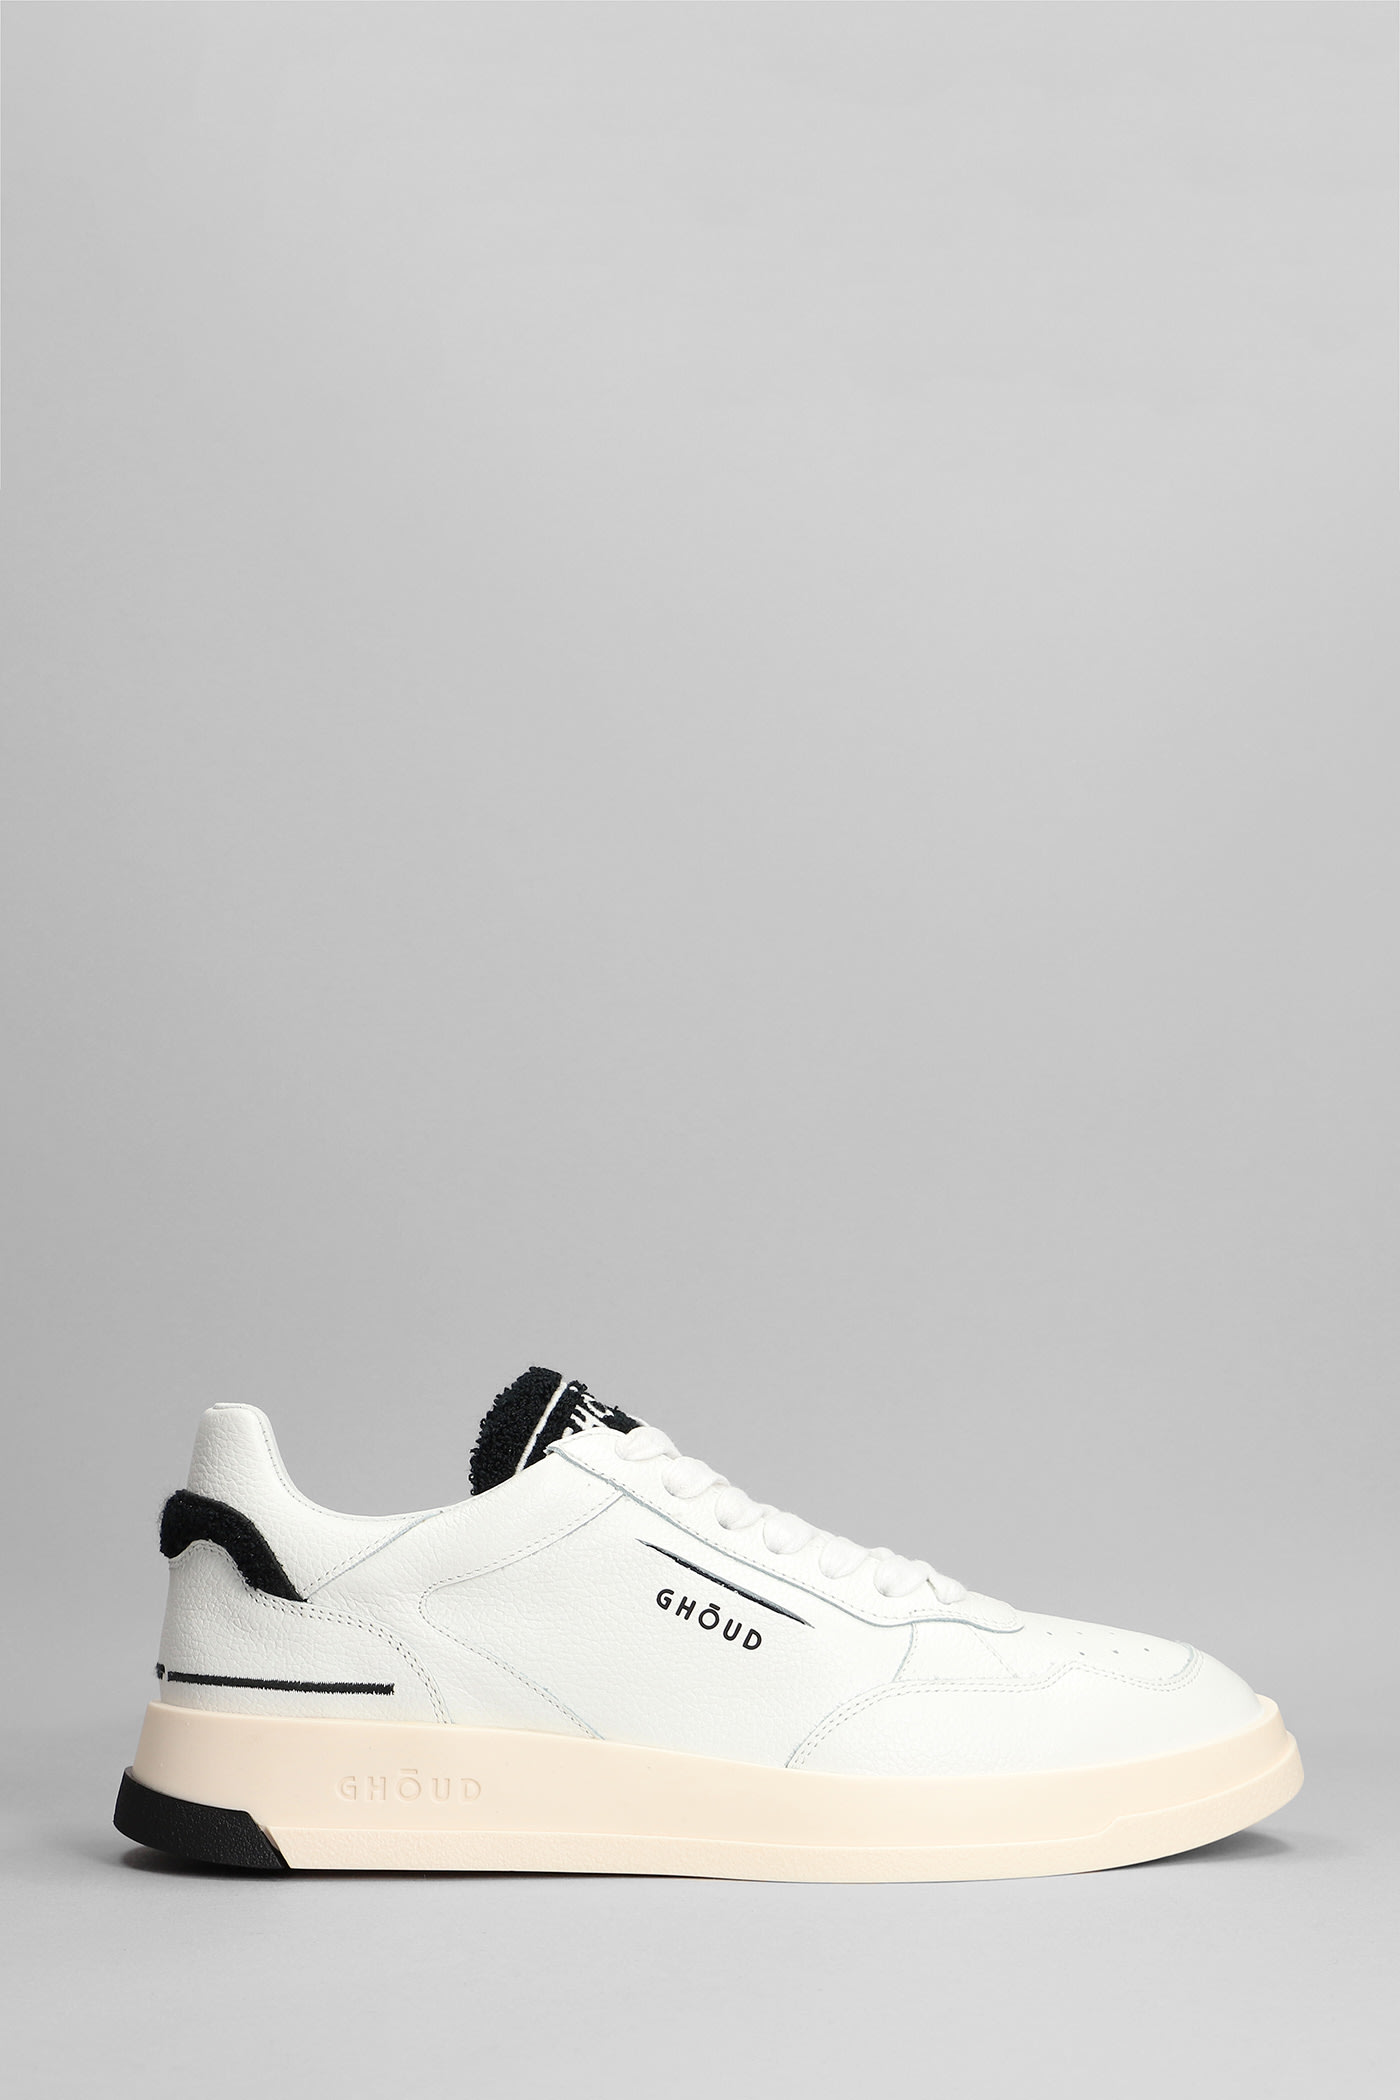 GHOUD Tweener Sneakers In White Leather And Fabric